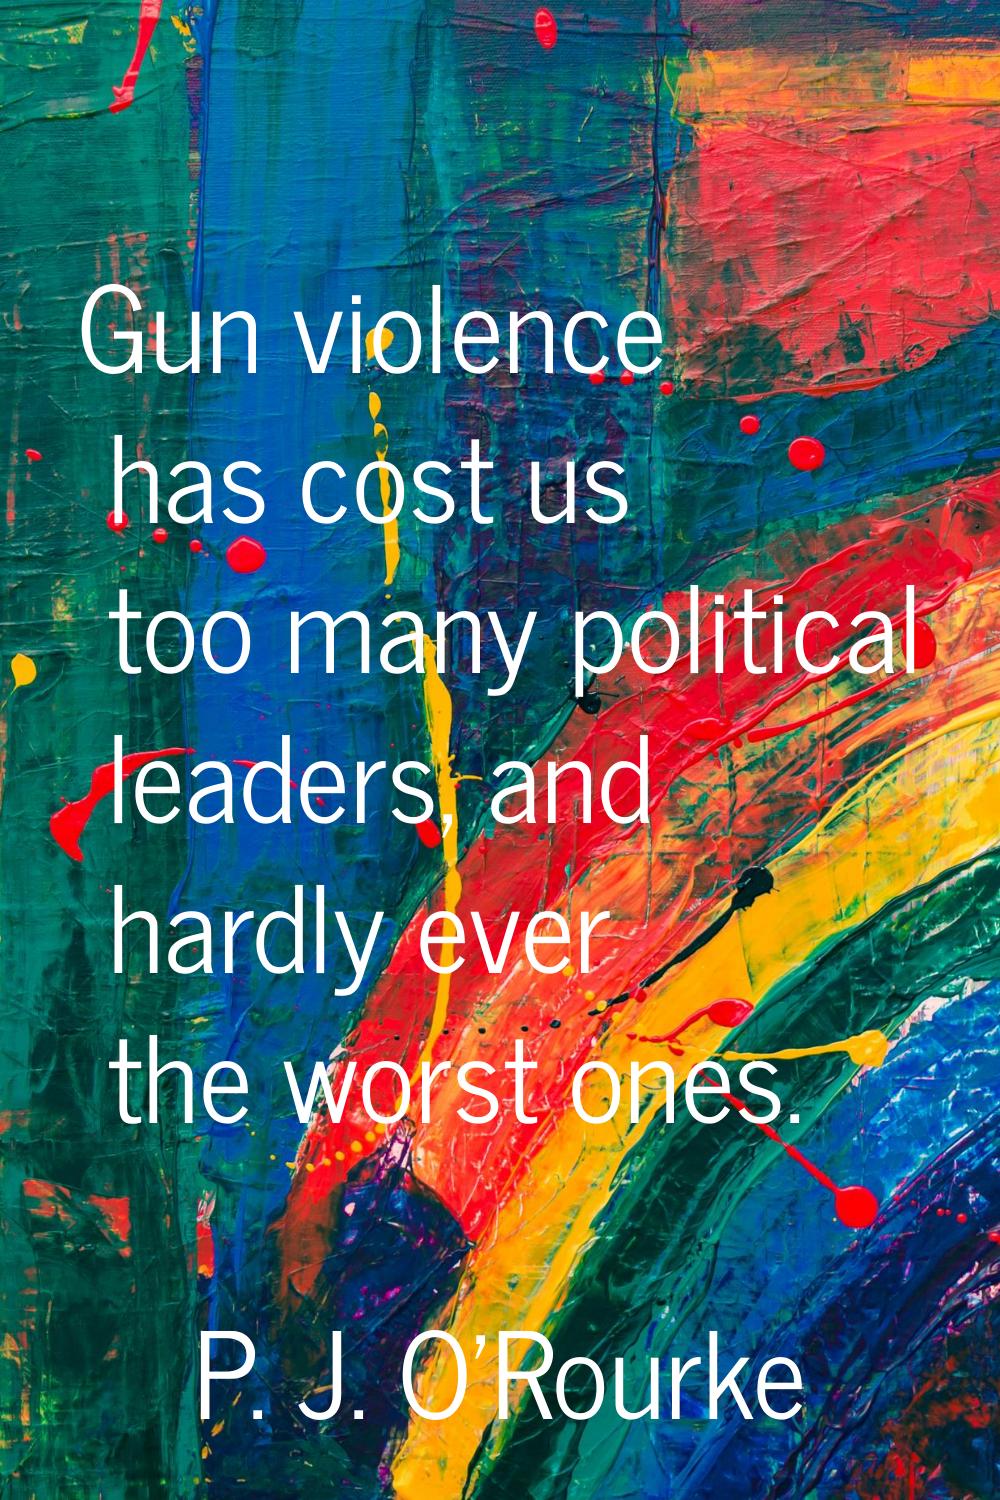 Gun violence has cost us too many political leaders, and hardly ever the worst ones.